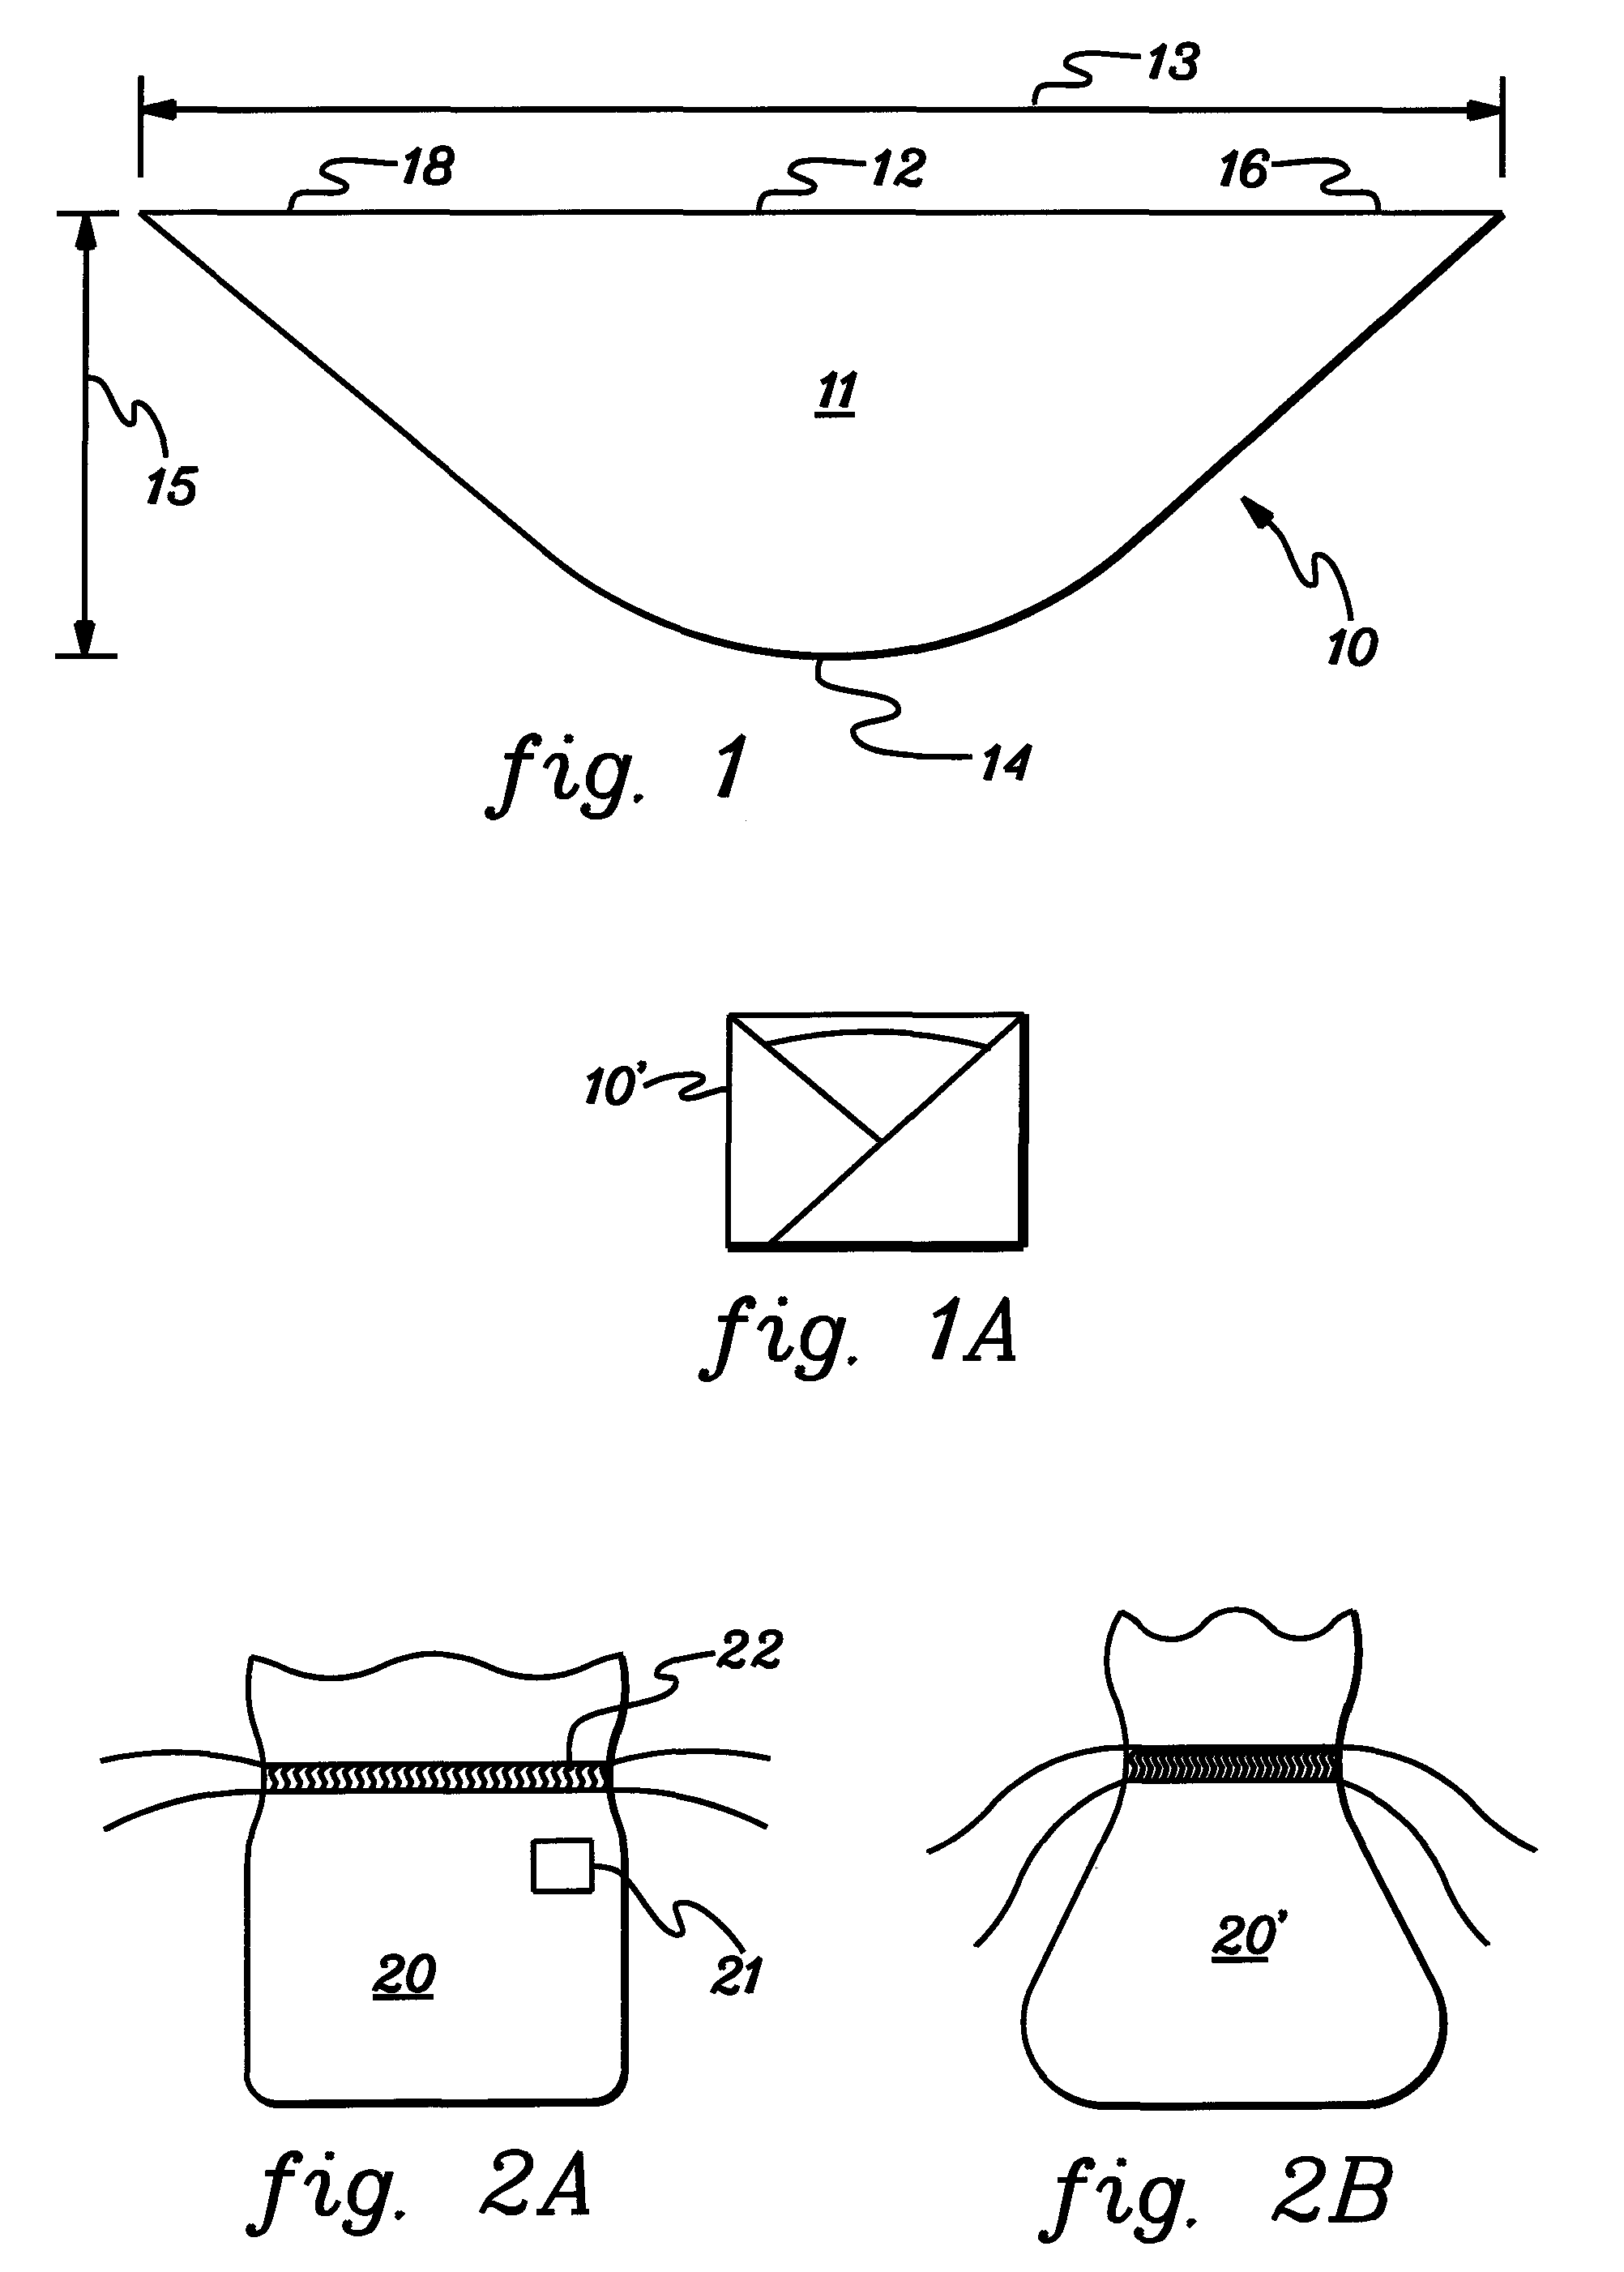 Wrap and cover-up device